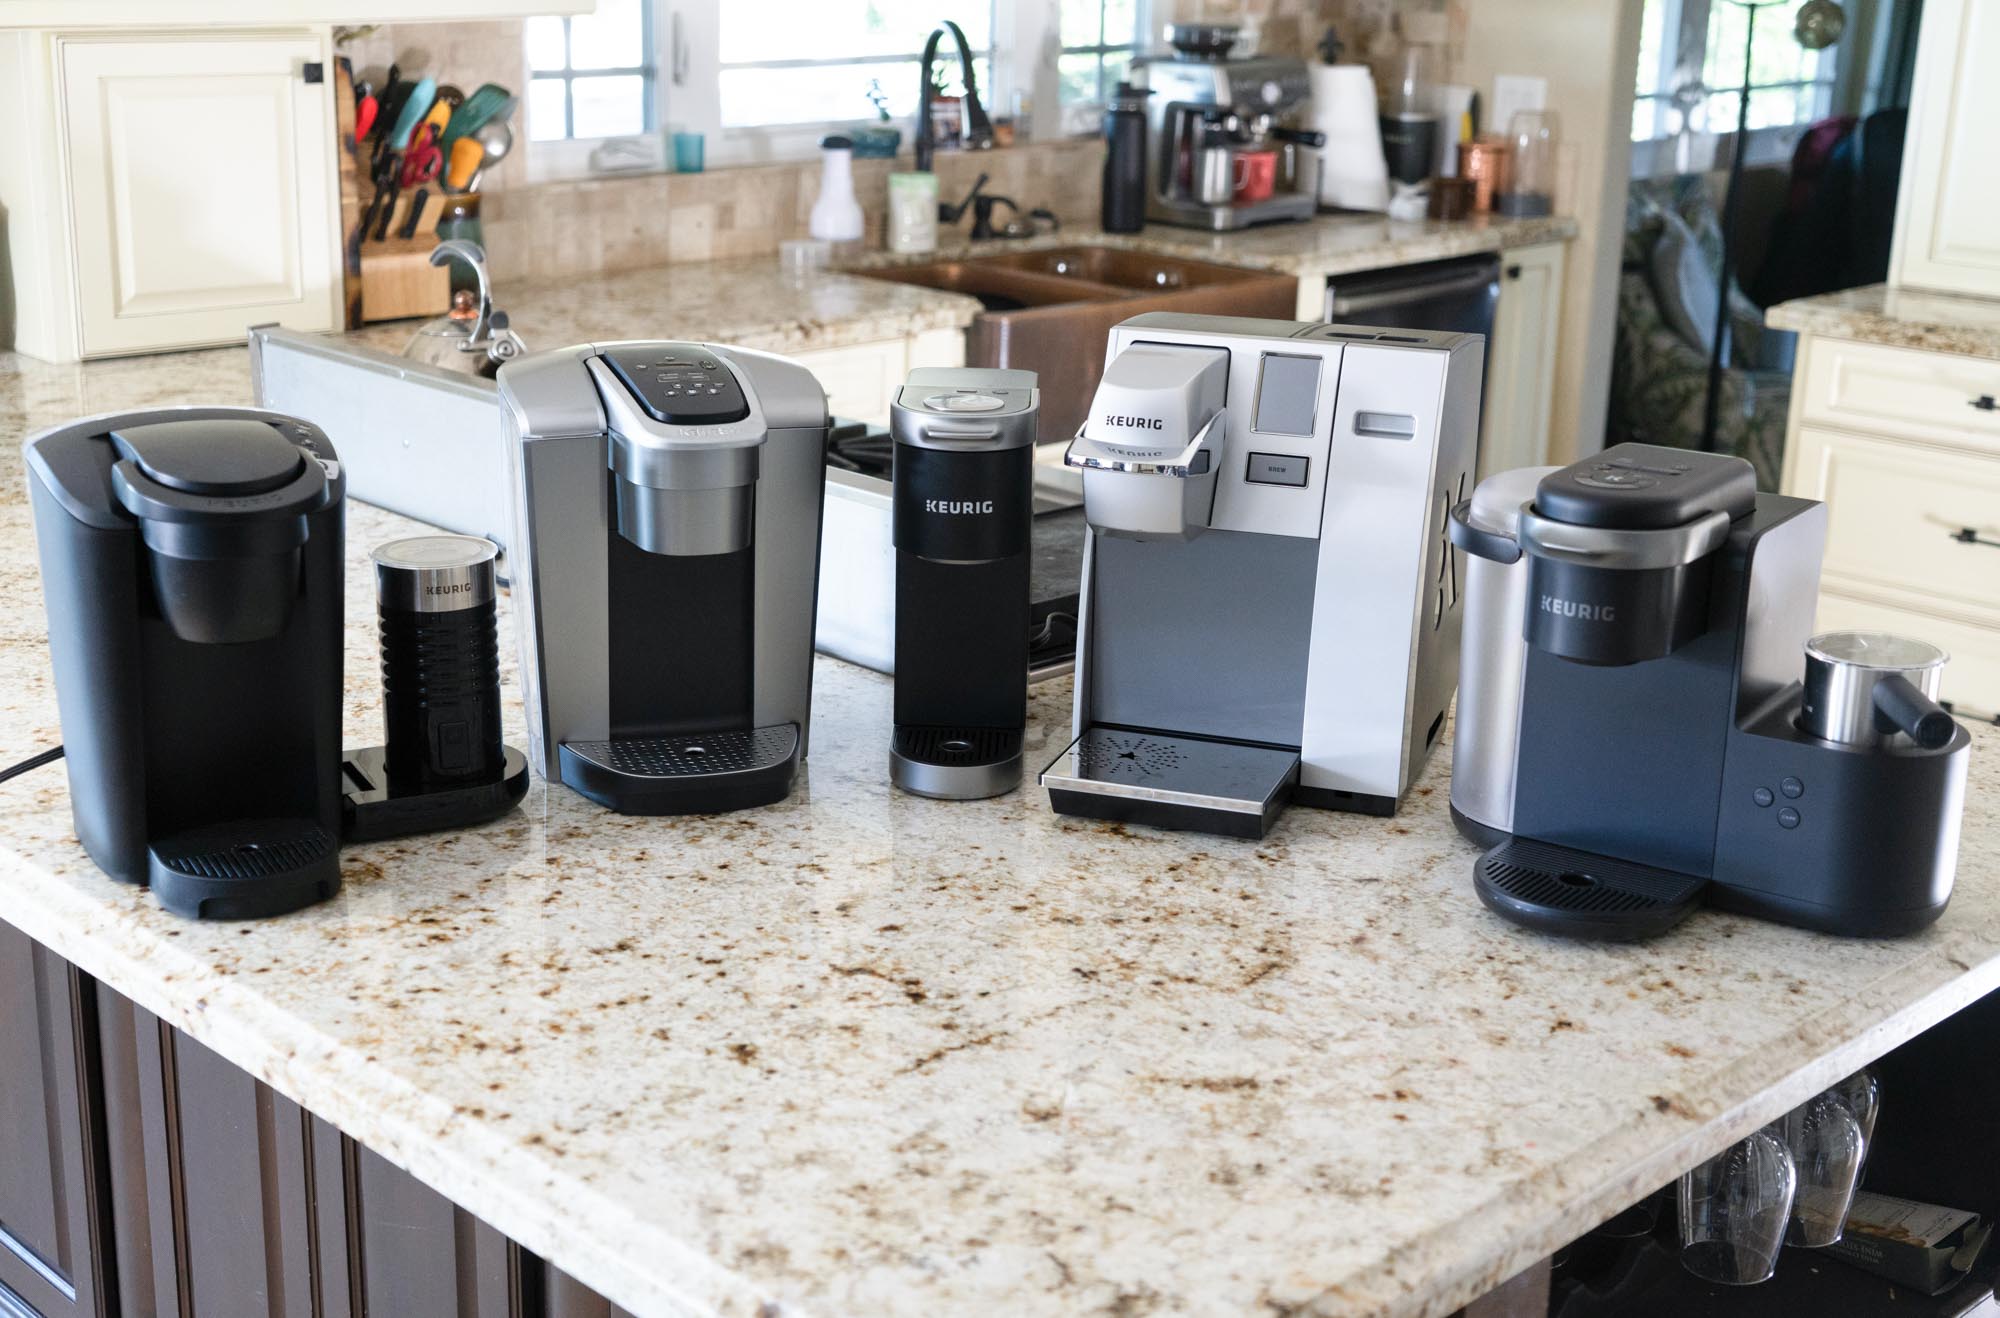 Coffee makers lined up on granite counter top.